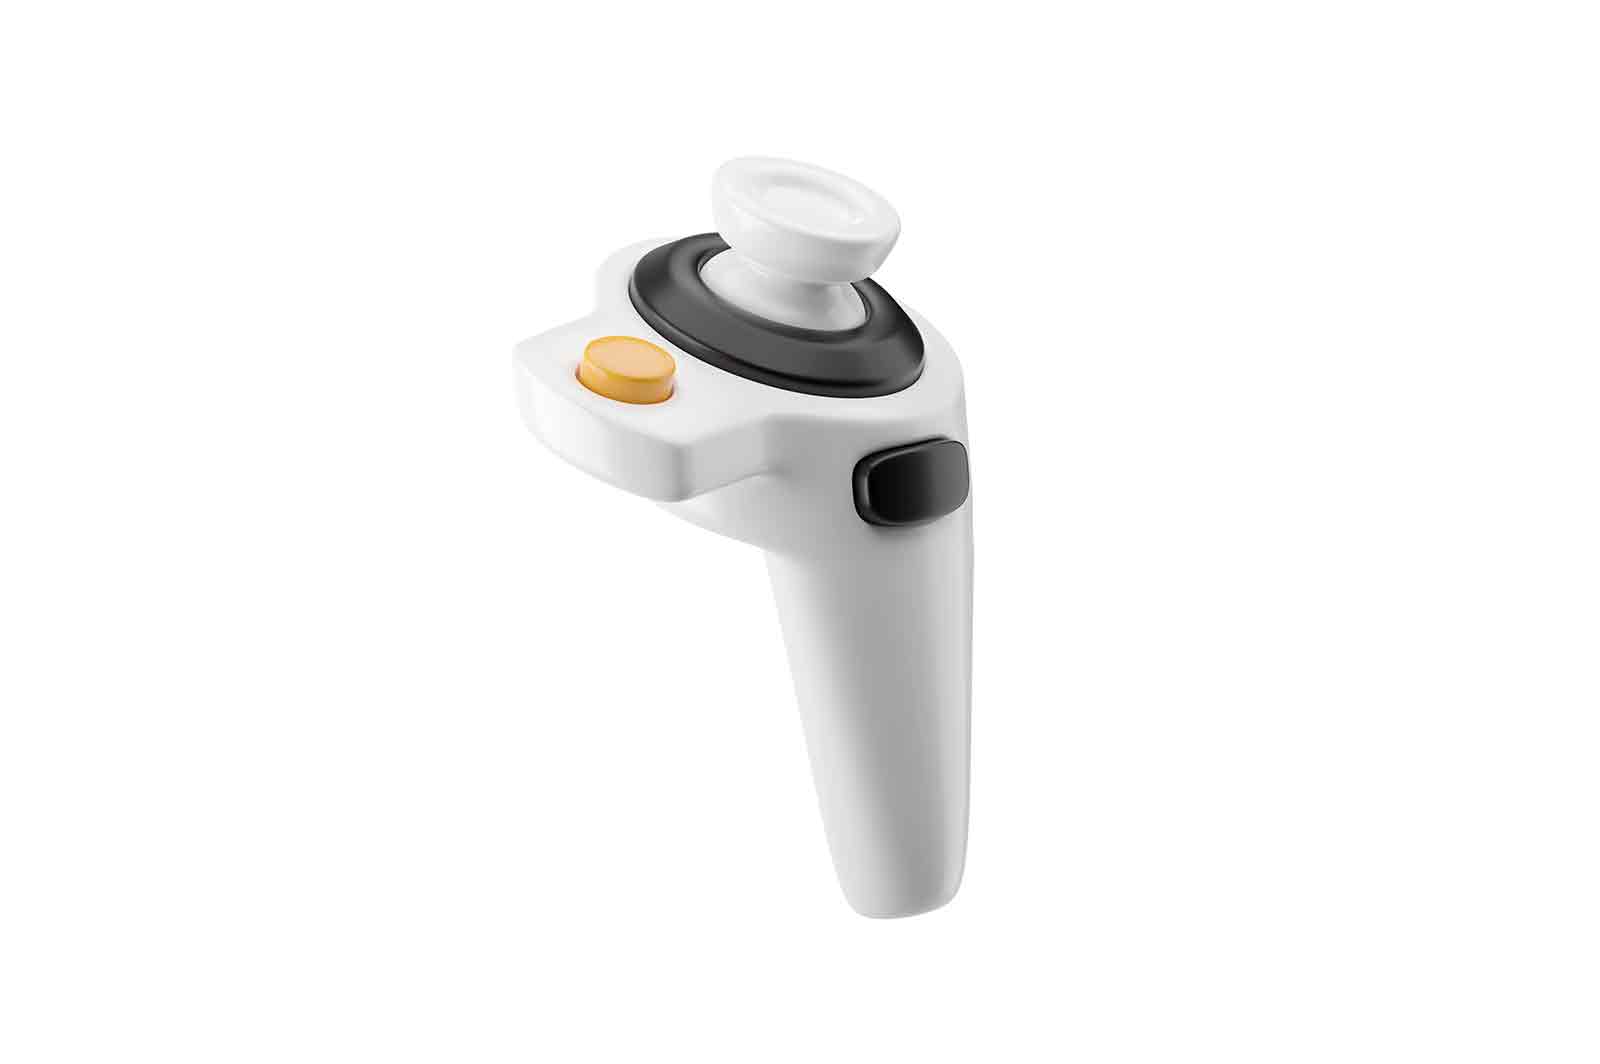 Virtual reality controller 3d rendered illustration, with white body and black and yellow handle. Isolated on white background.